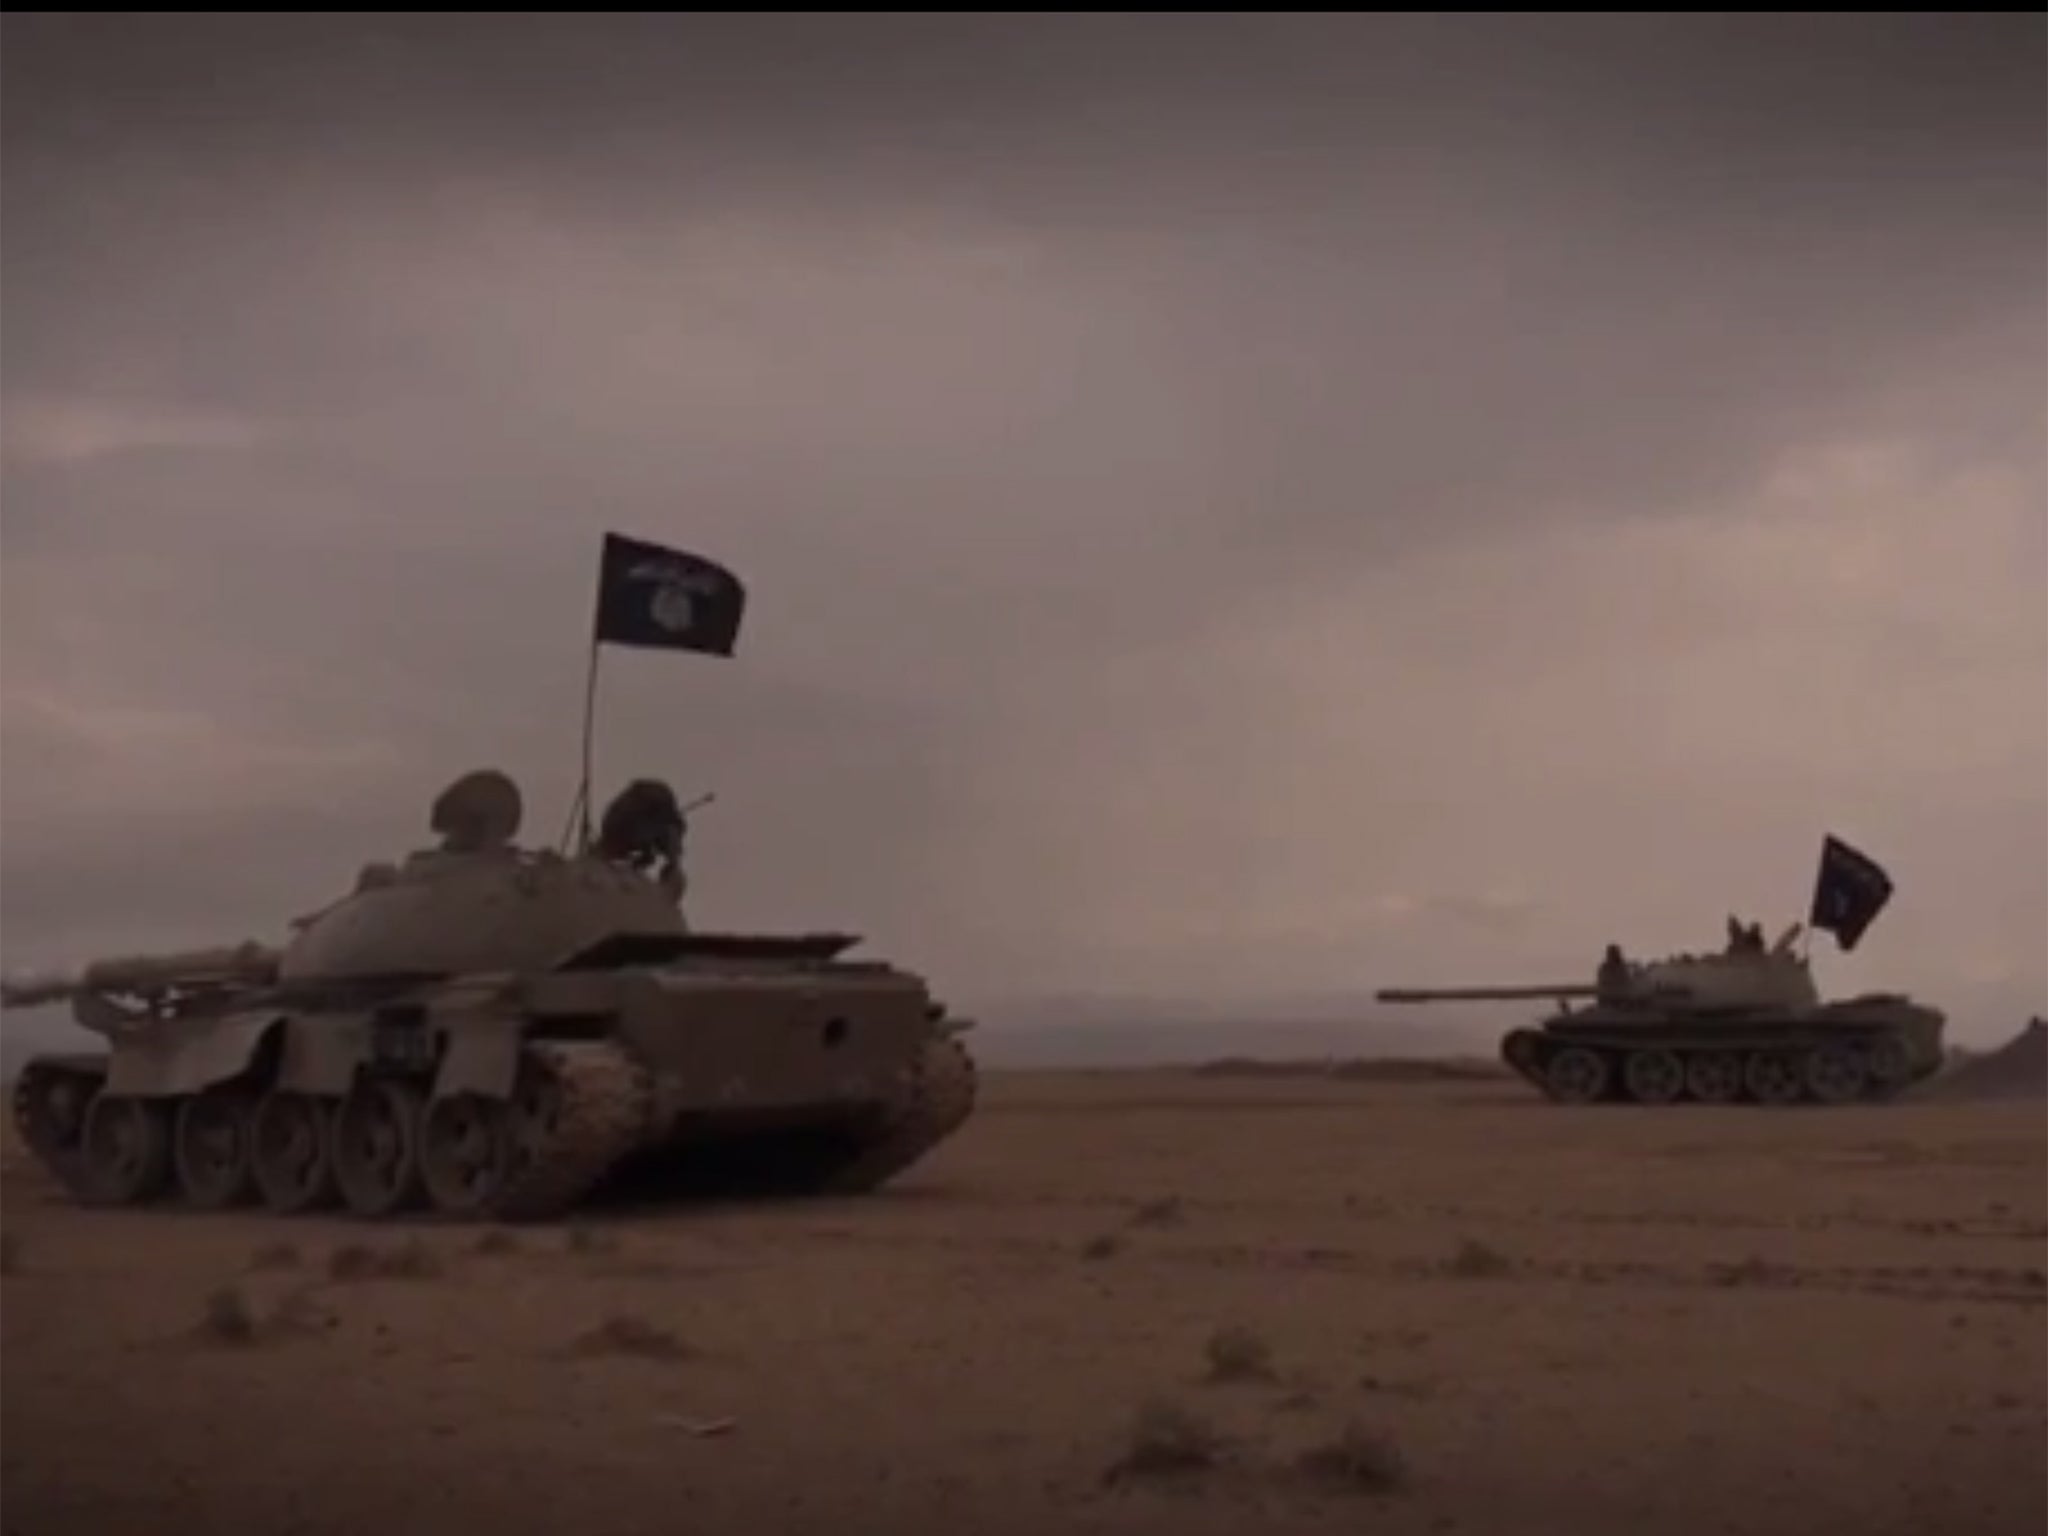 The video shows tanks displaying the black of Isis moving through the desert